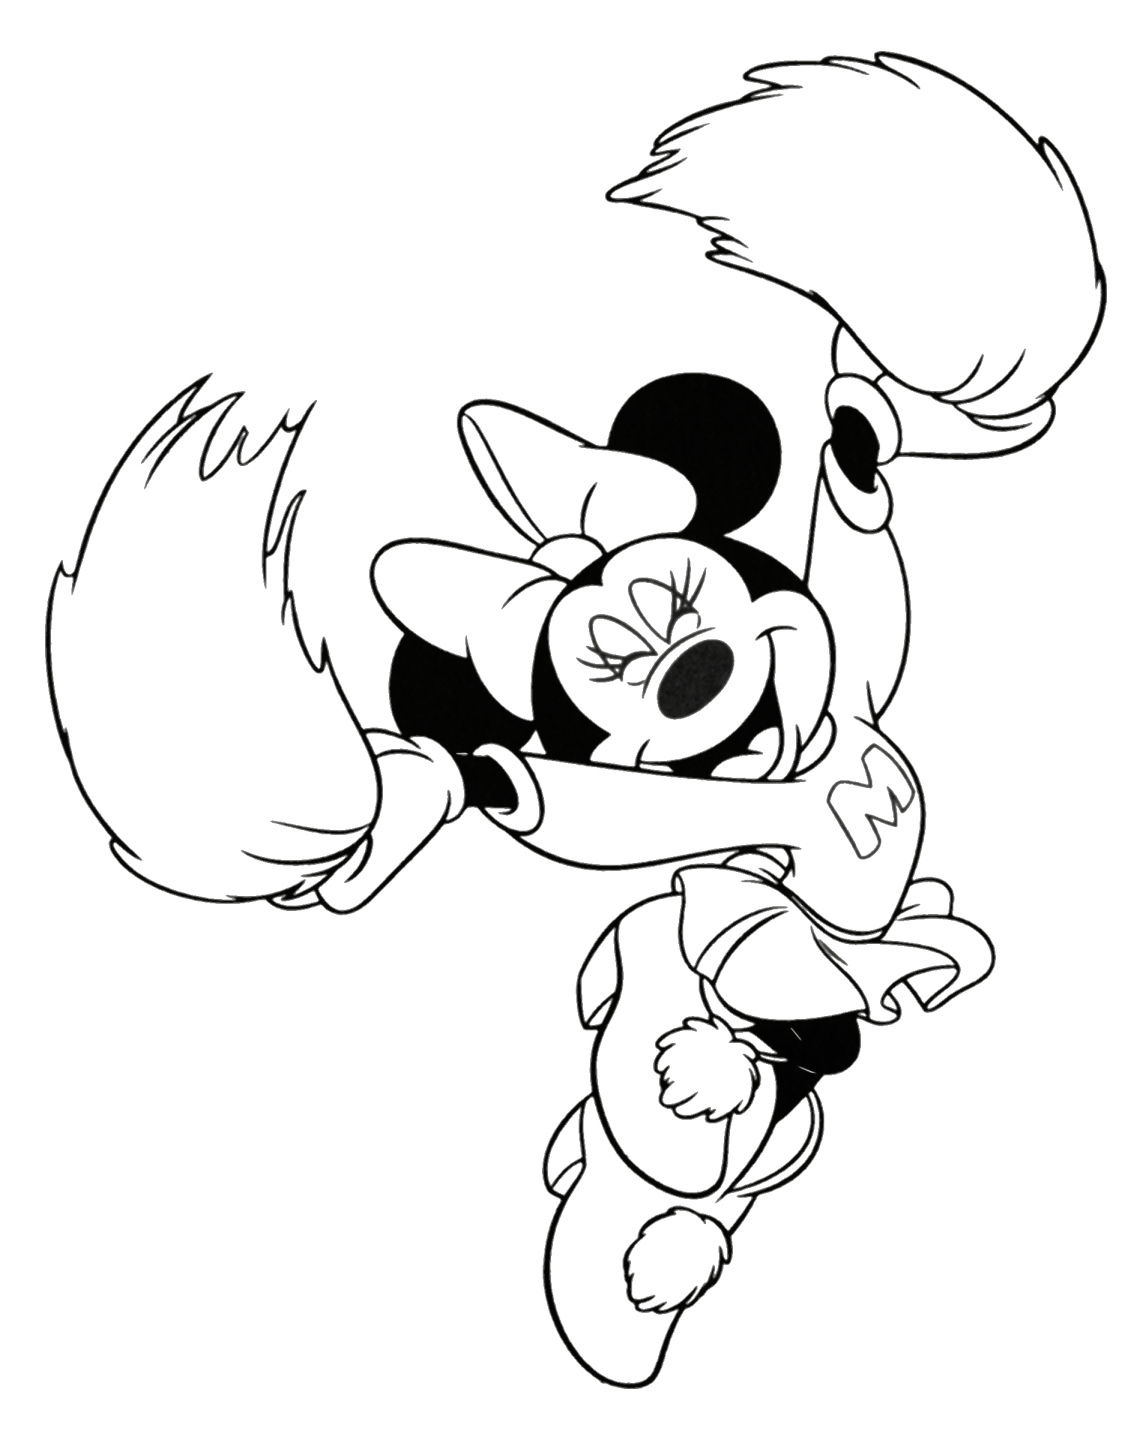 minnie mouse washington redskins cheerleader coloring pages